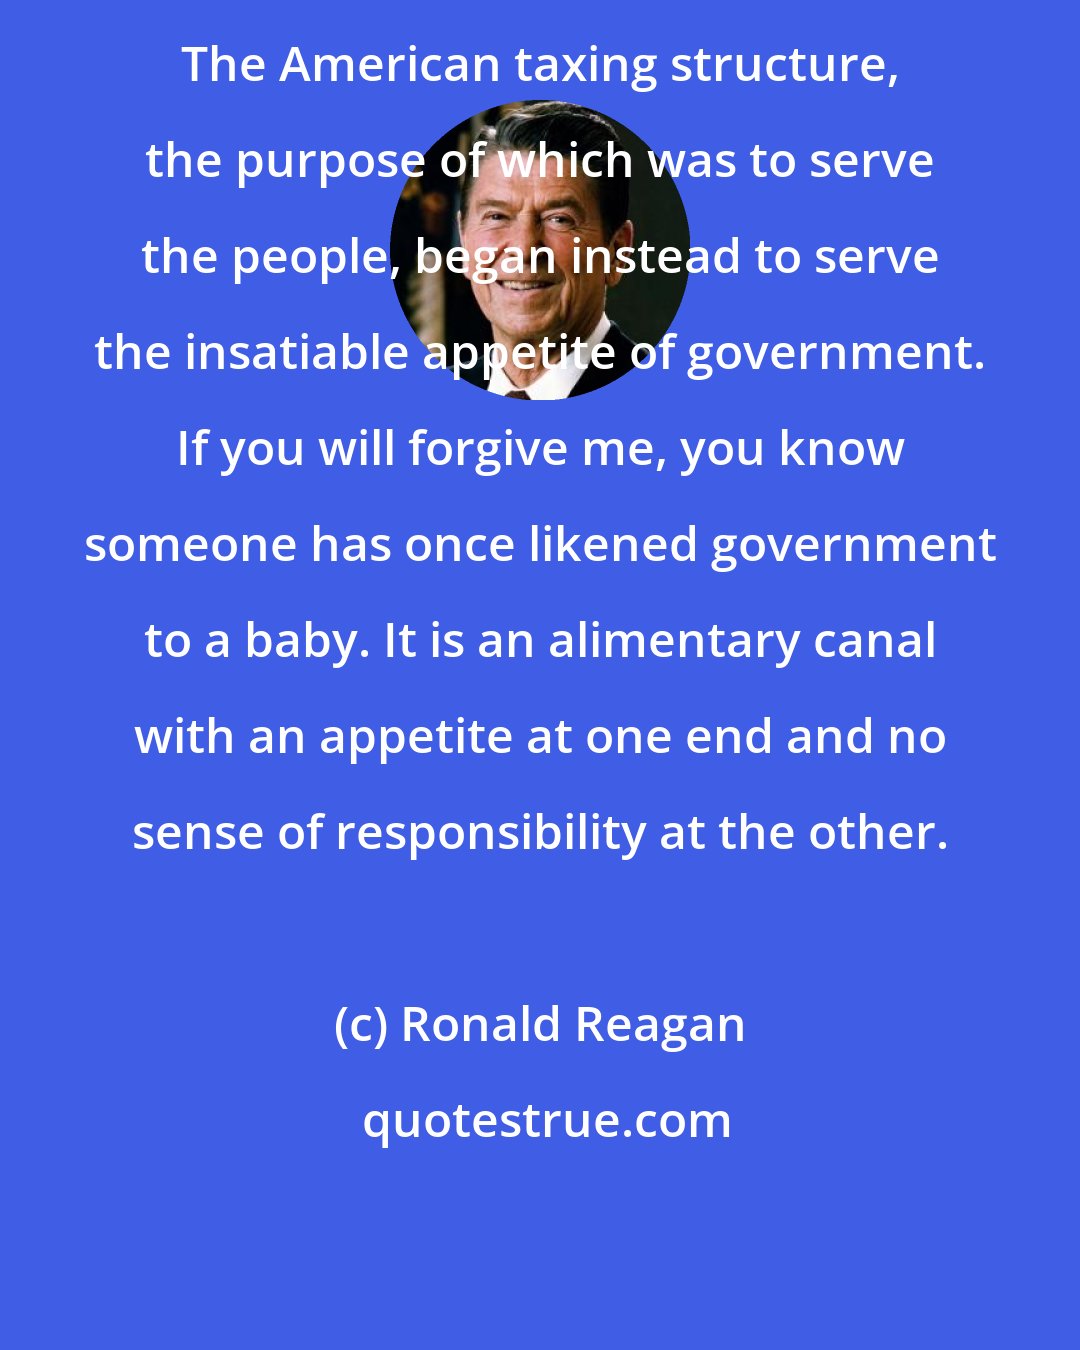 Ronald Reagan: The American taxing structure, the purpose of which was to serve the people, began instead to serve the insatiable appetite of government. If you will forgive me, you know someone has once likened government to a baby. It is an alimentary canal with an appetite at one end and no sense of responsibility at the other.